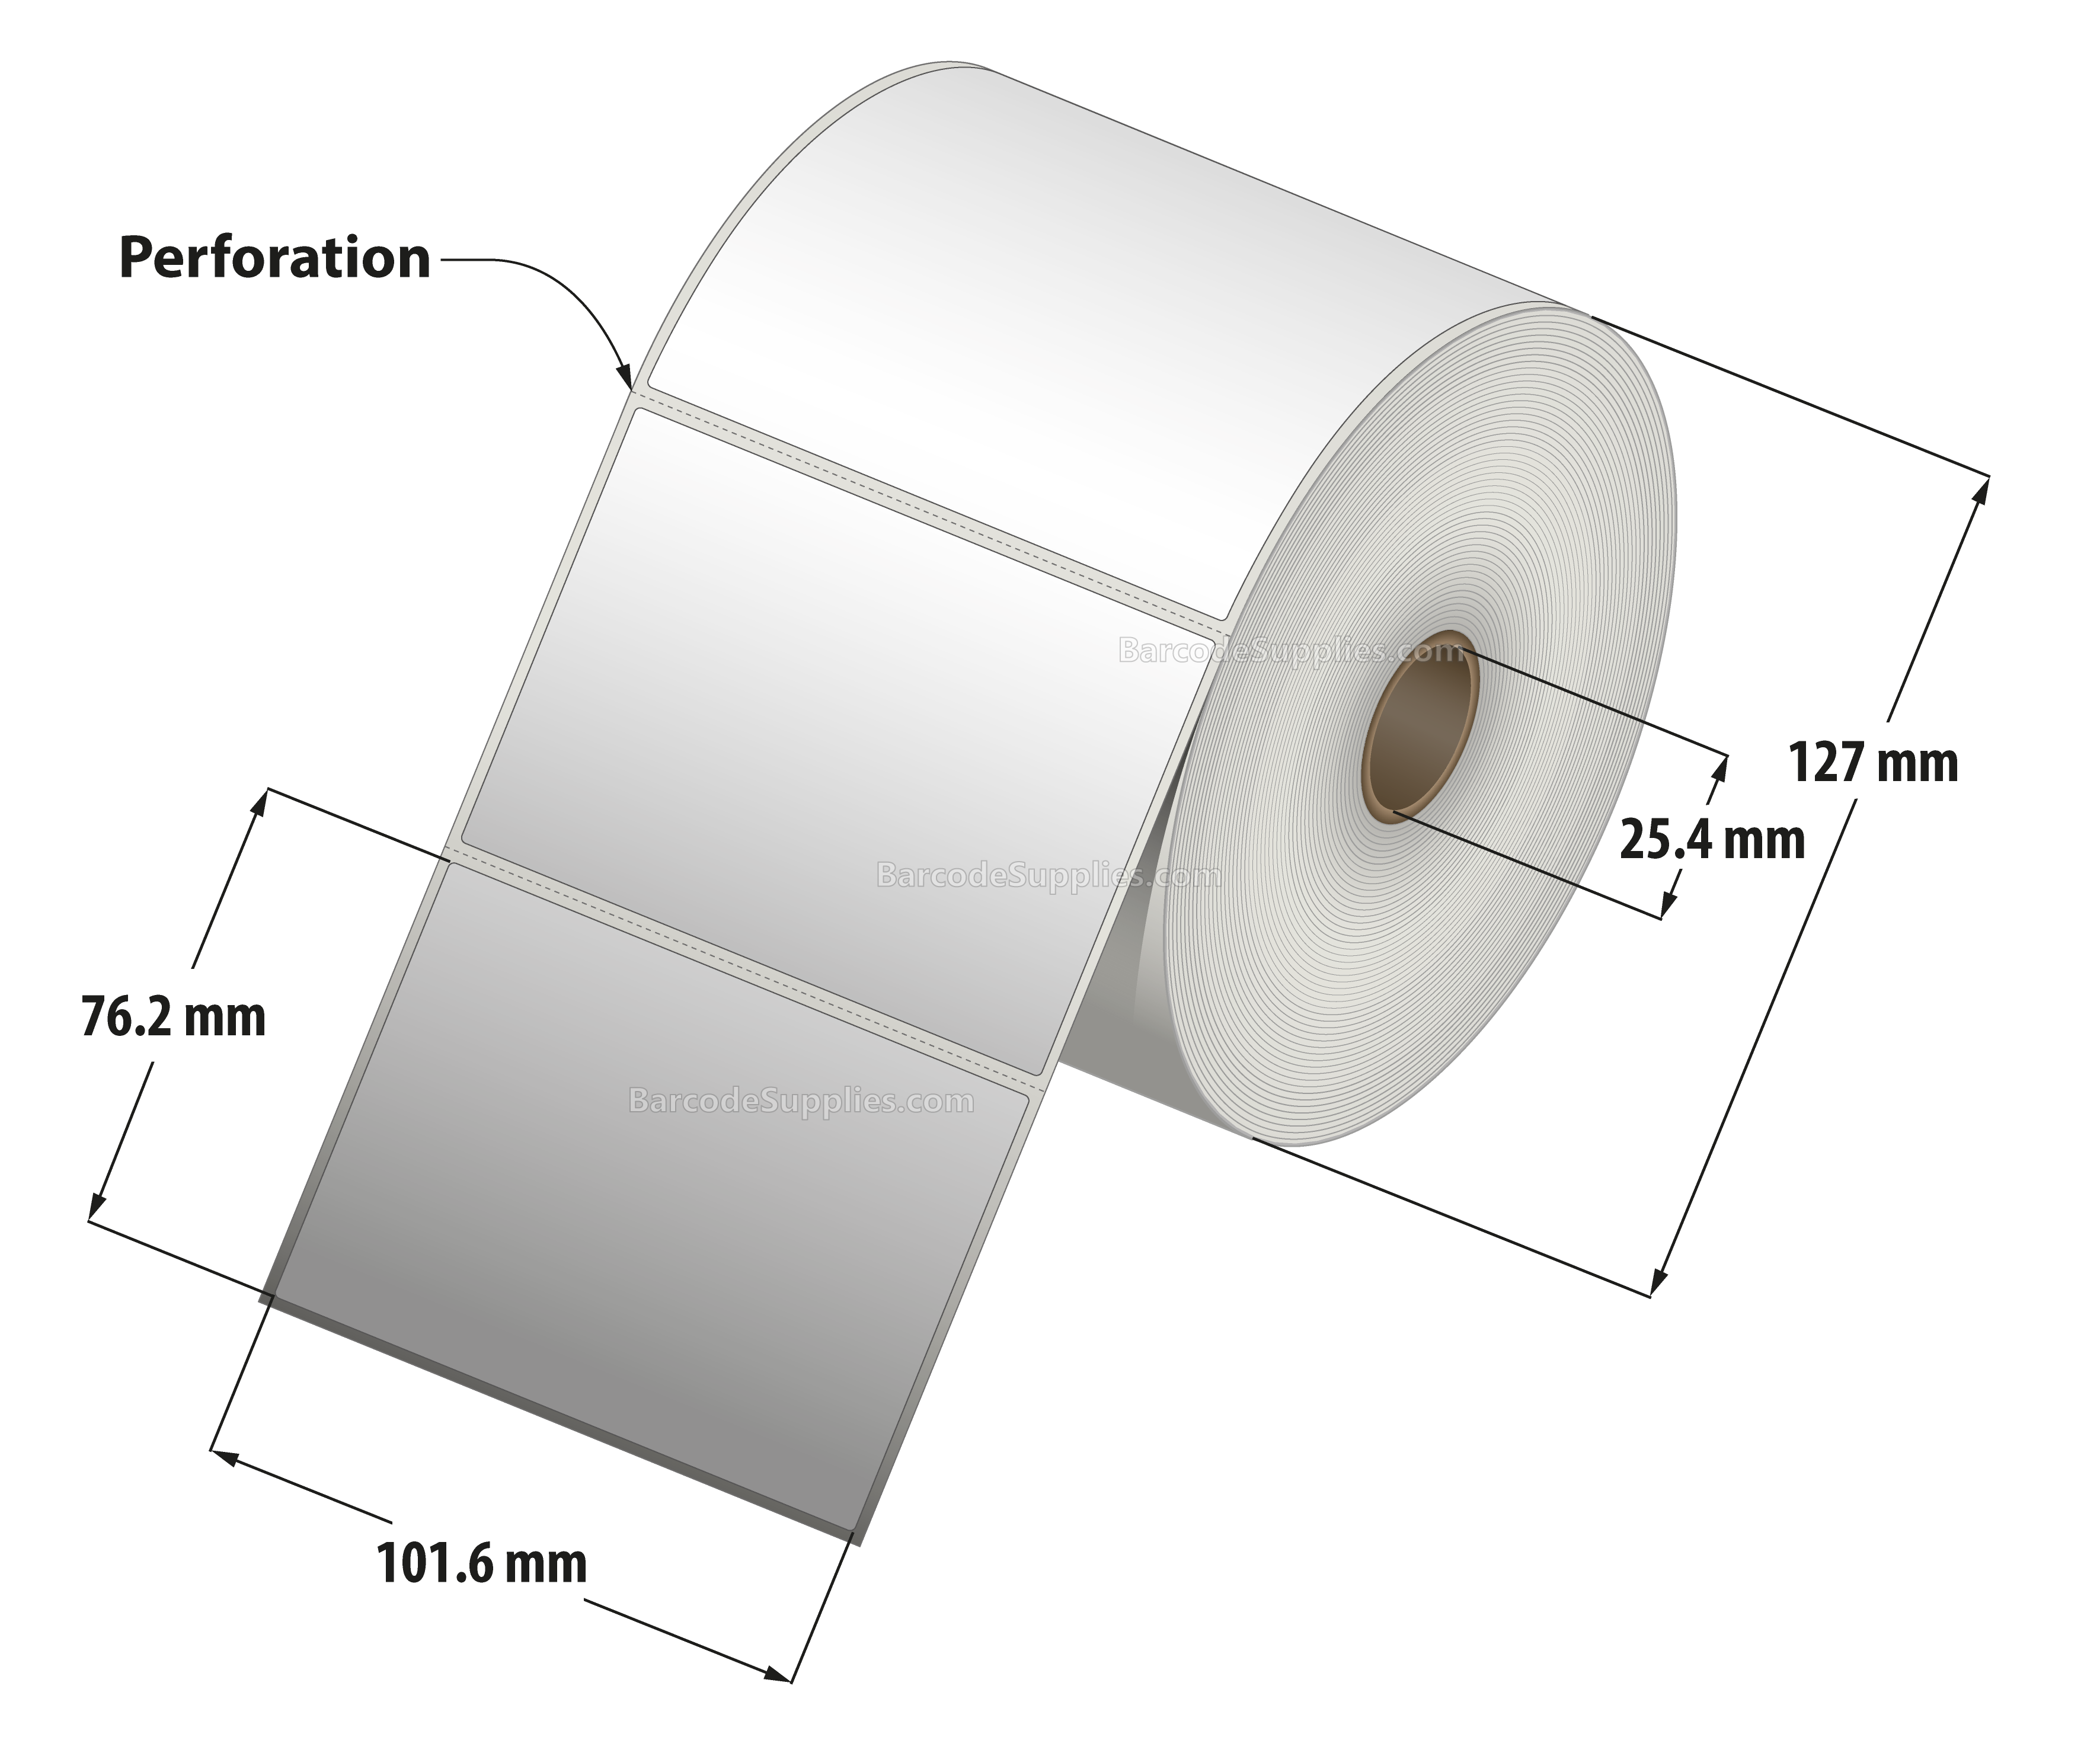 4 x 3 Thermal Transfer White Labels With Permanent Adhesive - Perforated - 890 Labels Per Roll - Carton Of 12 Rolls - 10680 Labels Total - MPN: RT-4-3-890-1 - BarcodeSource, Inc.